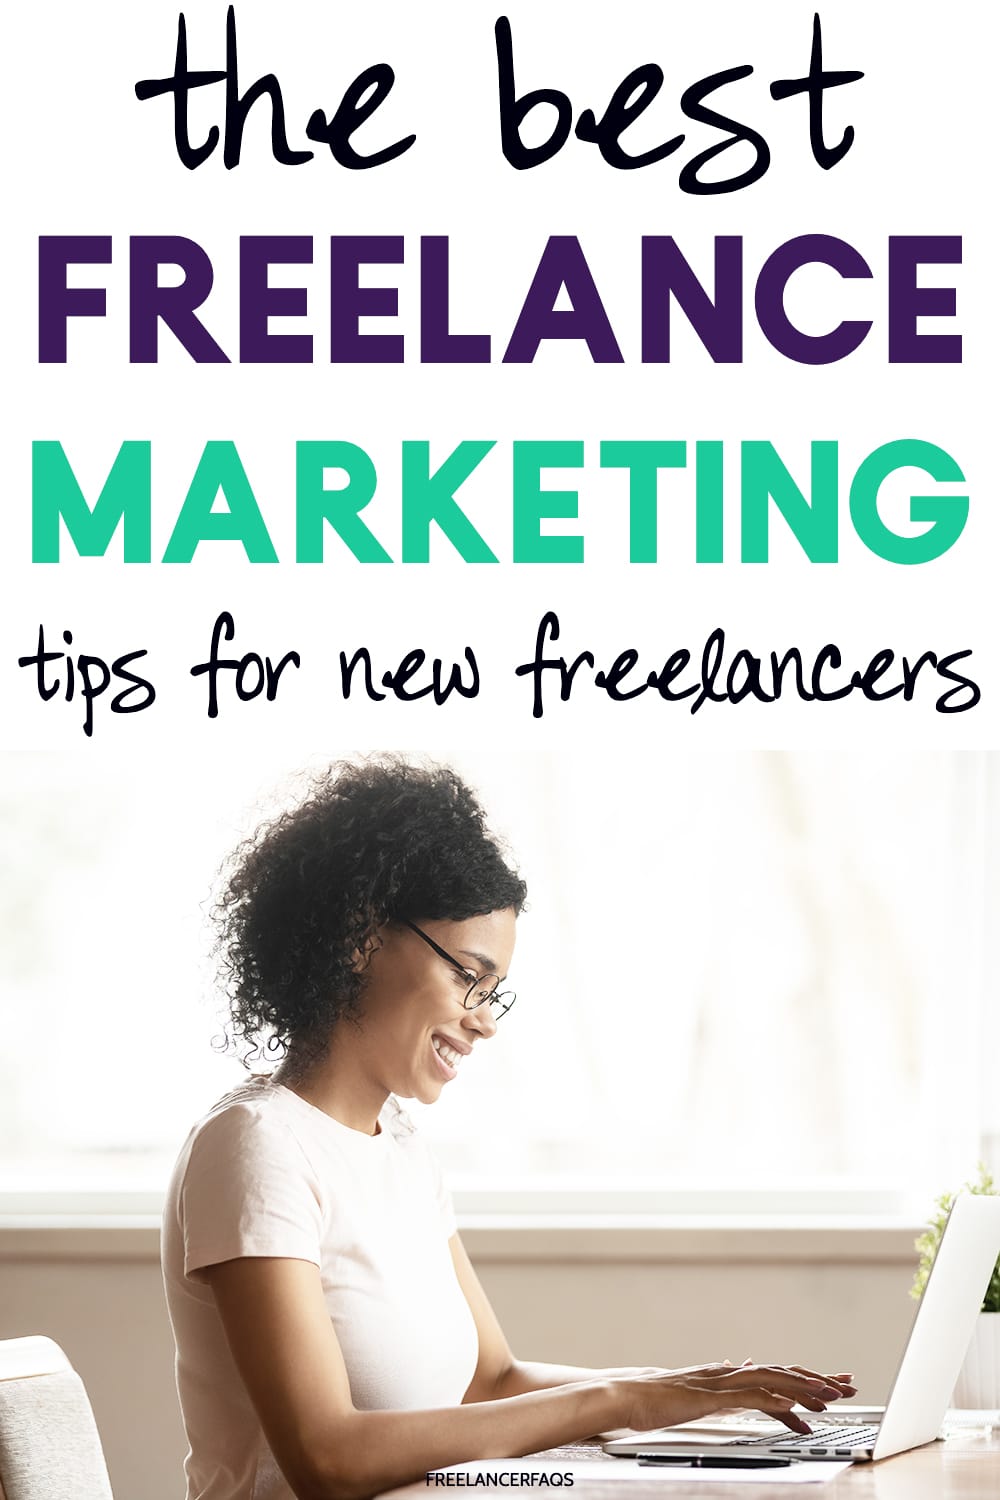 What Are the Best Freelance Marketing Tips for Beginners? Freelancer FAQs